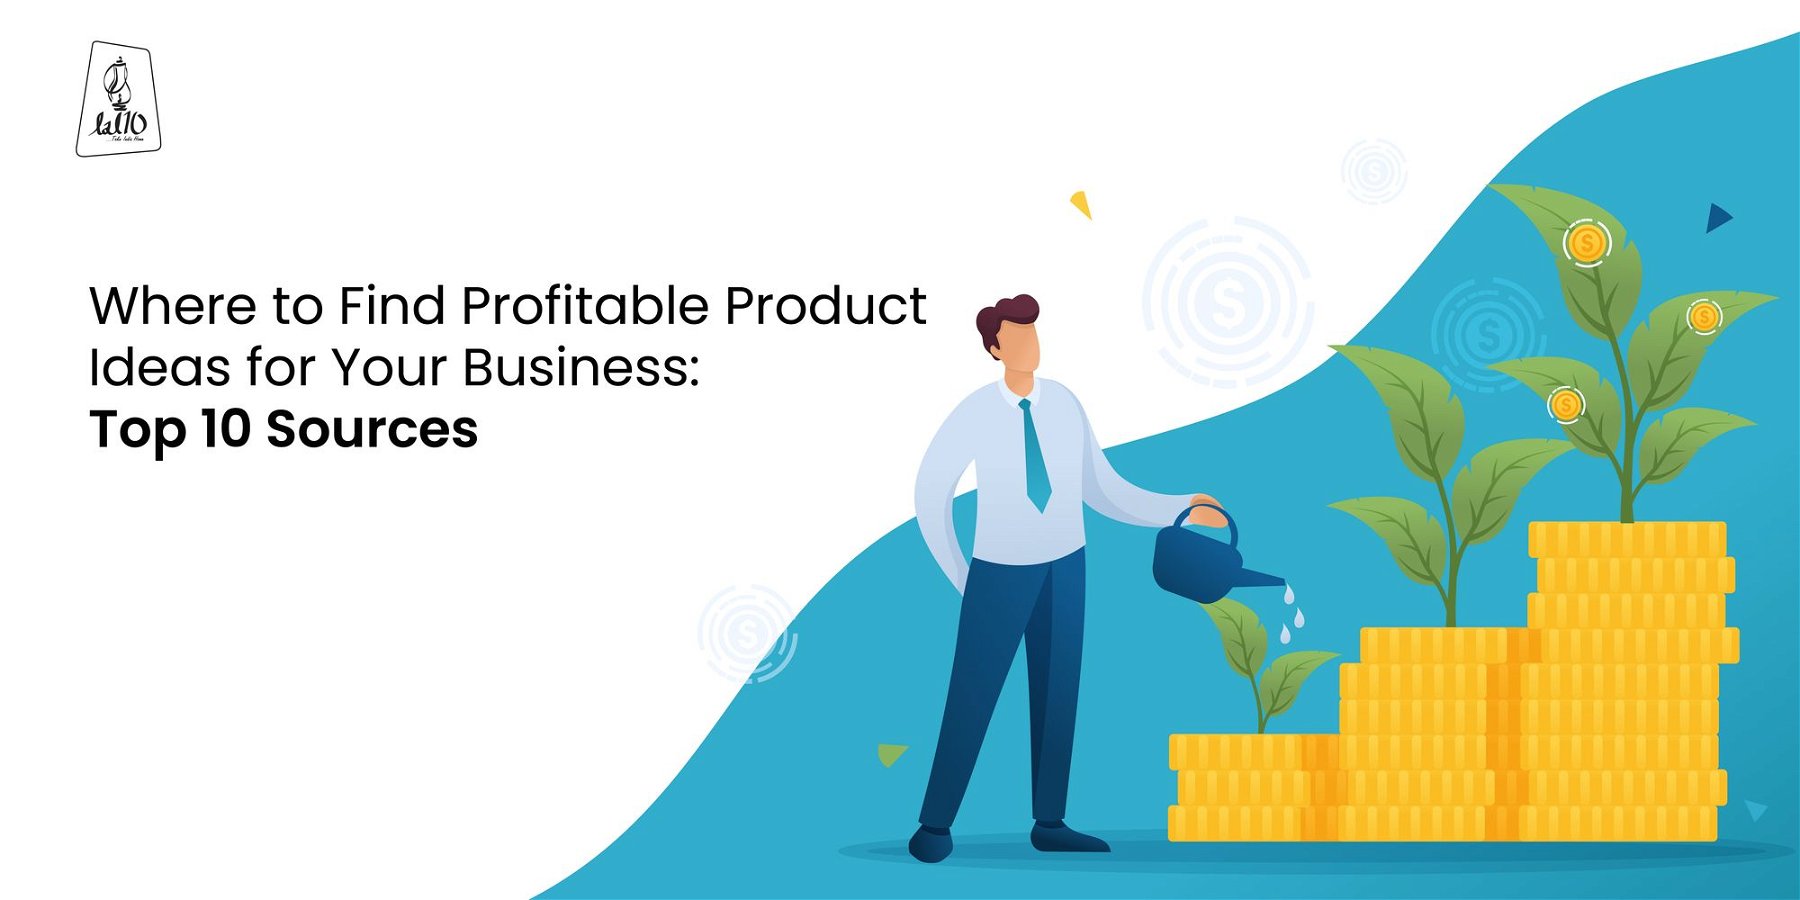 Where to Find Profitable Product Ideas for Your Business: Top 10 Sources